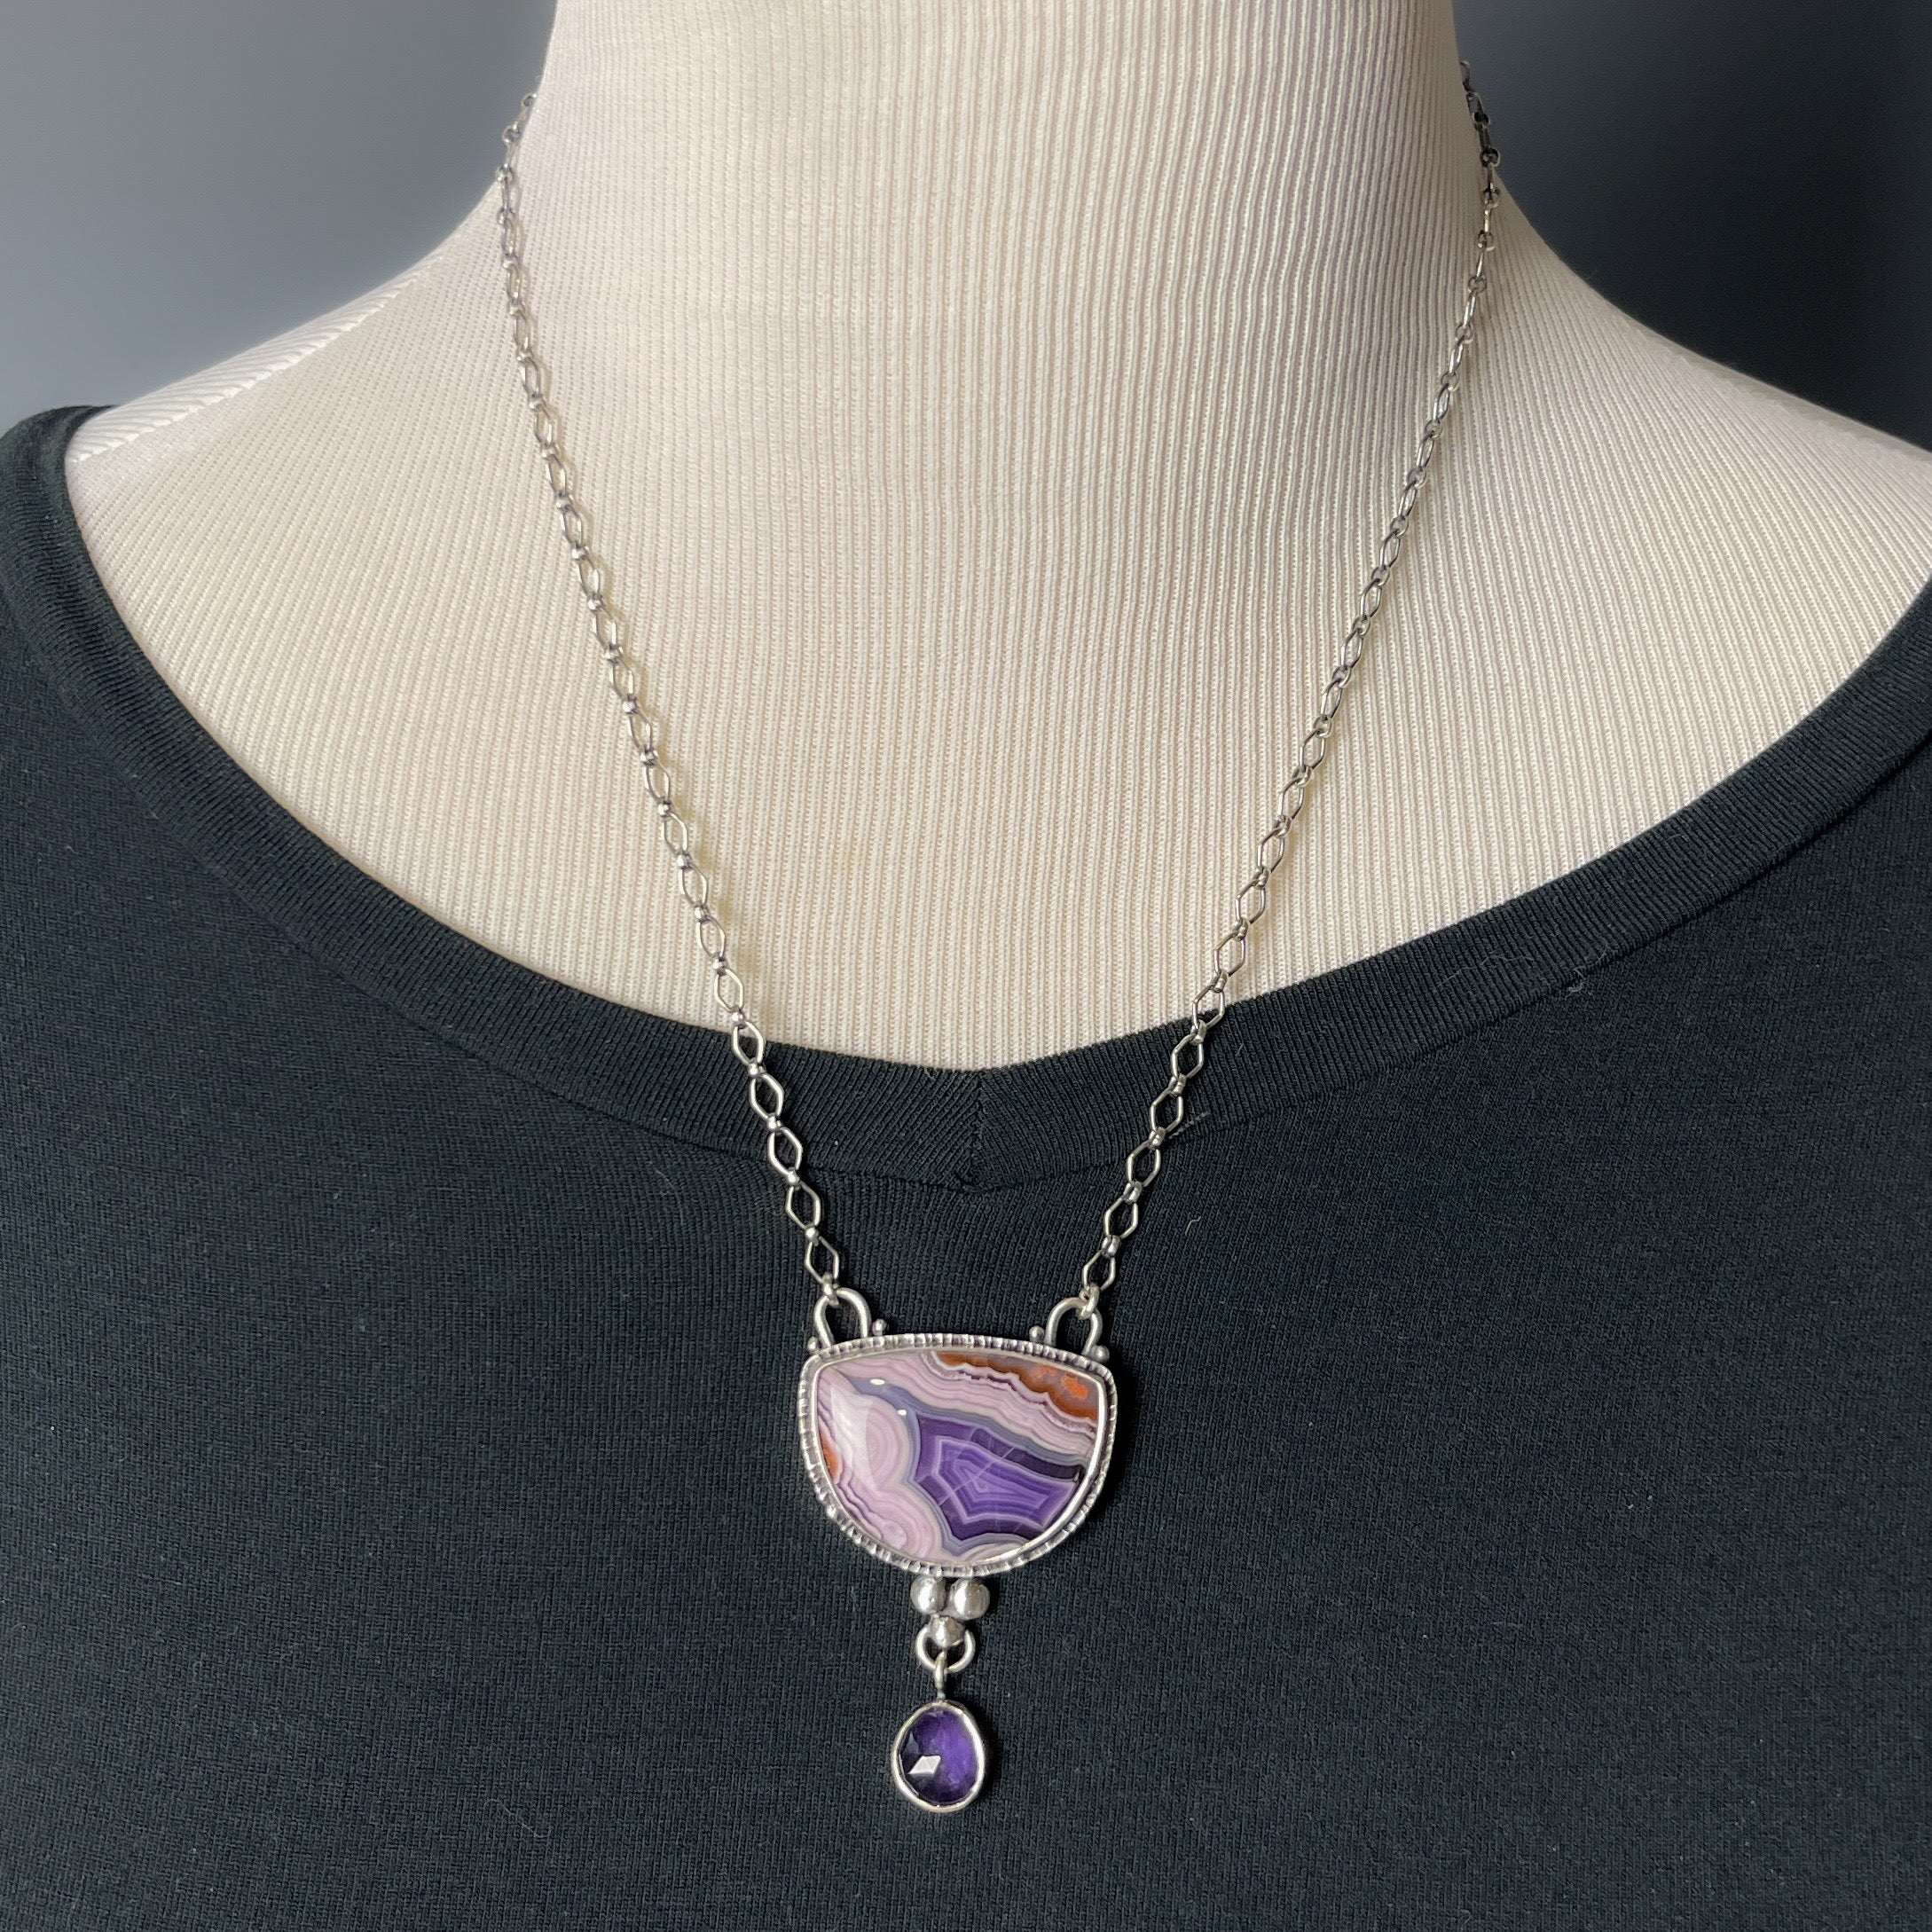 Purple Passion Agate and Amethyst Pendant Necklace